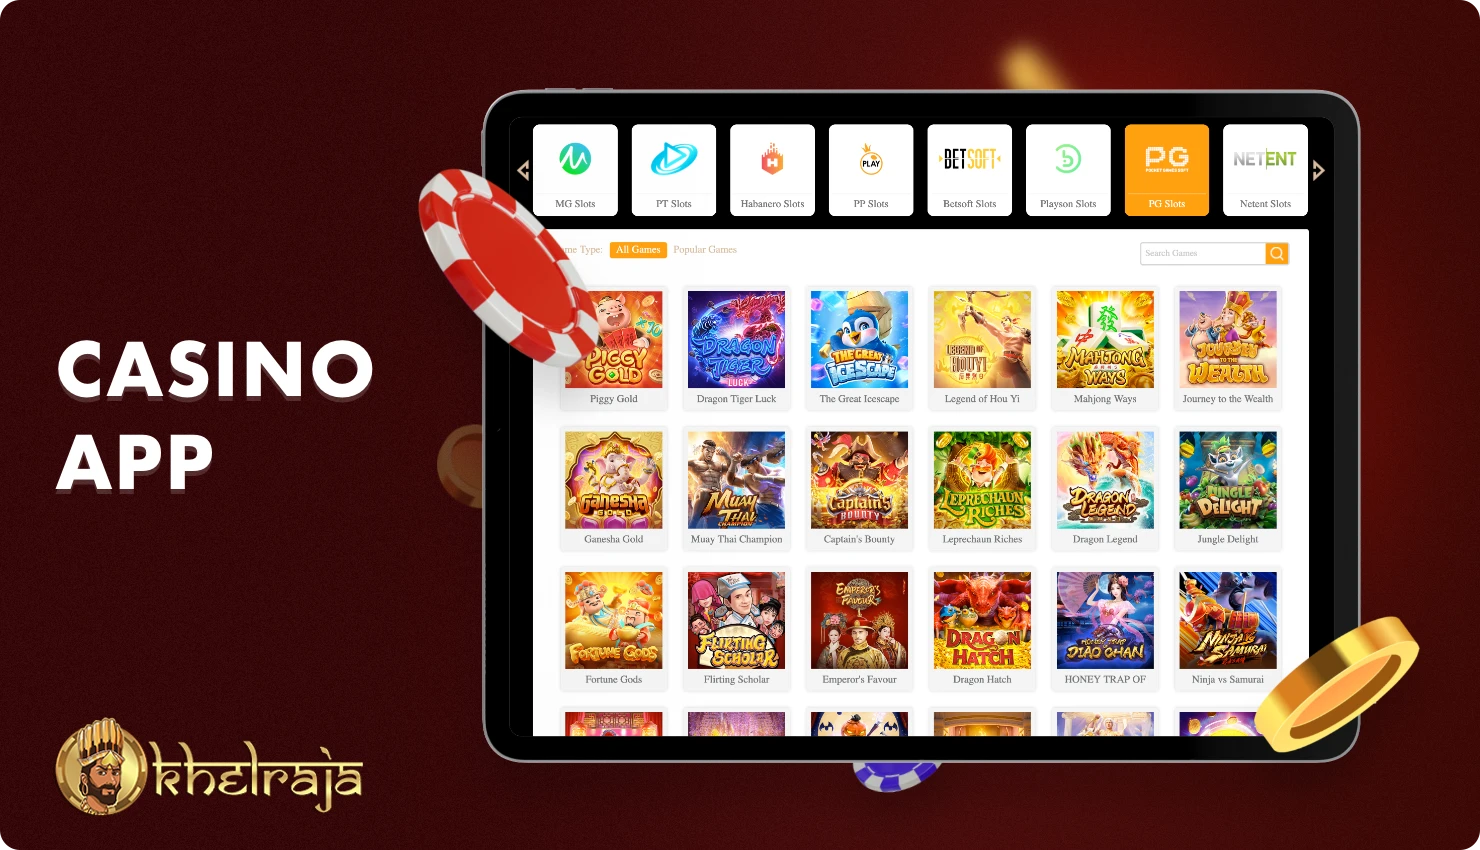 The Khelraja app features a casino section with amazing slots, as well as live croupier games